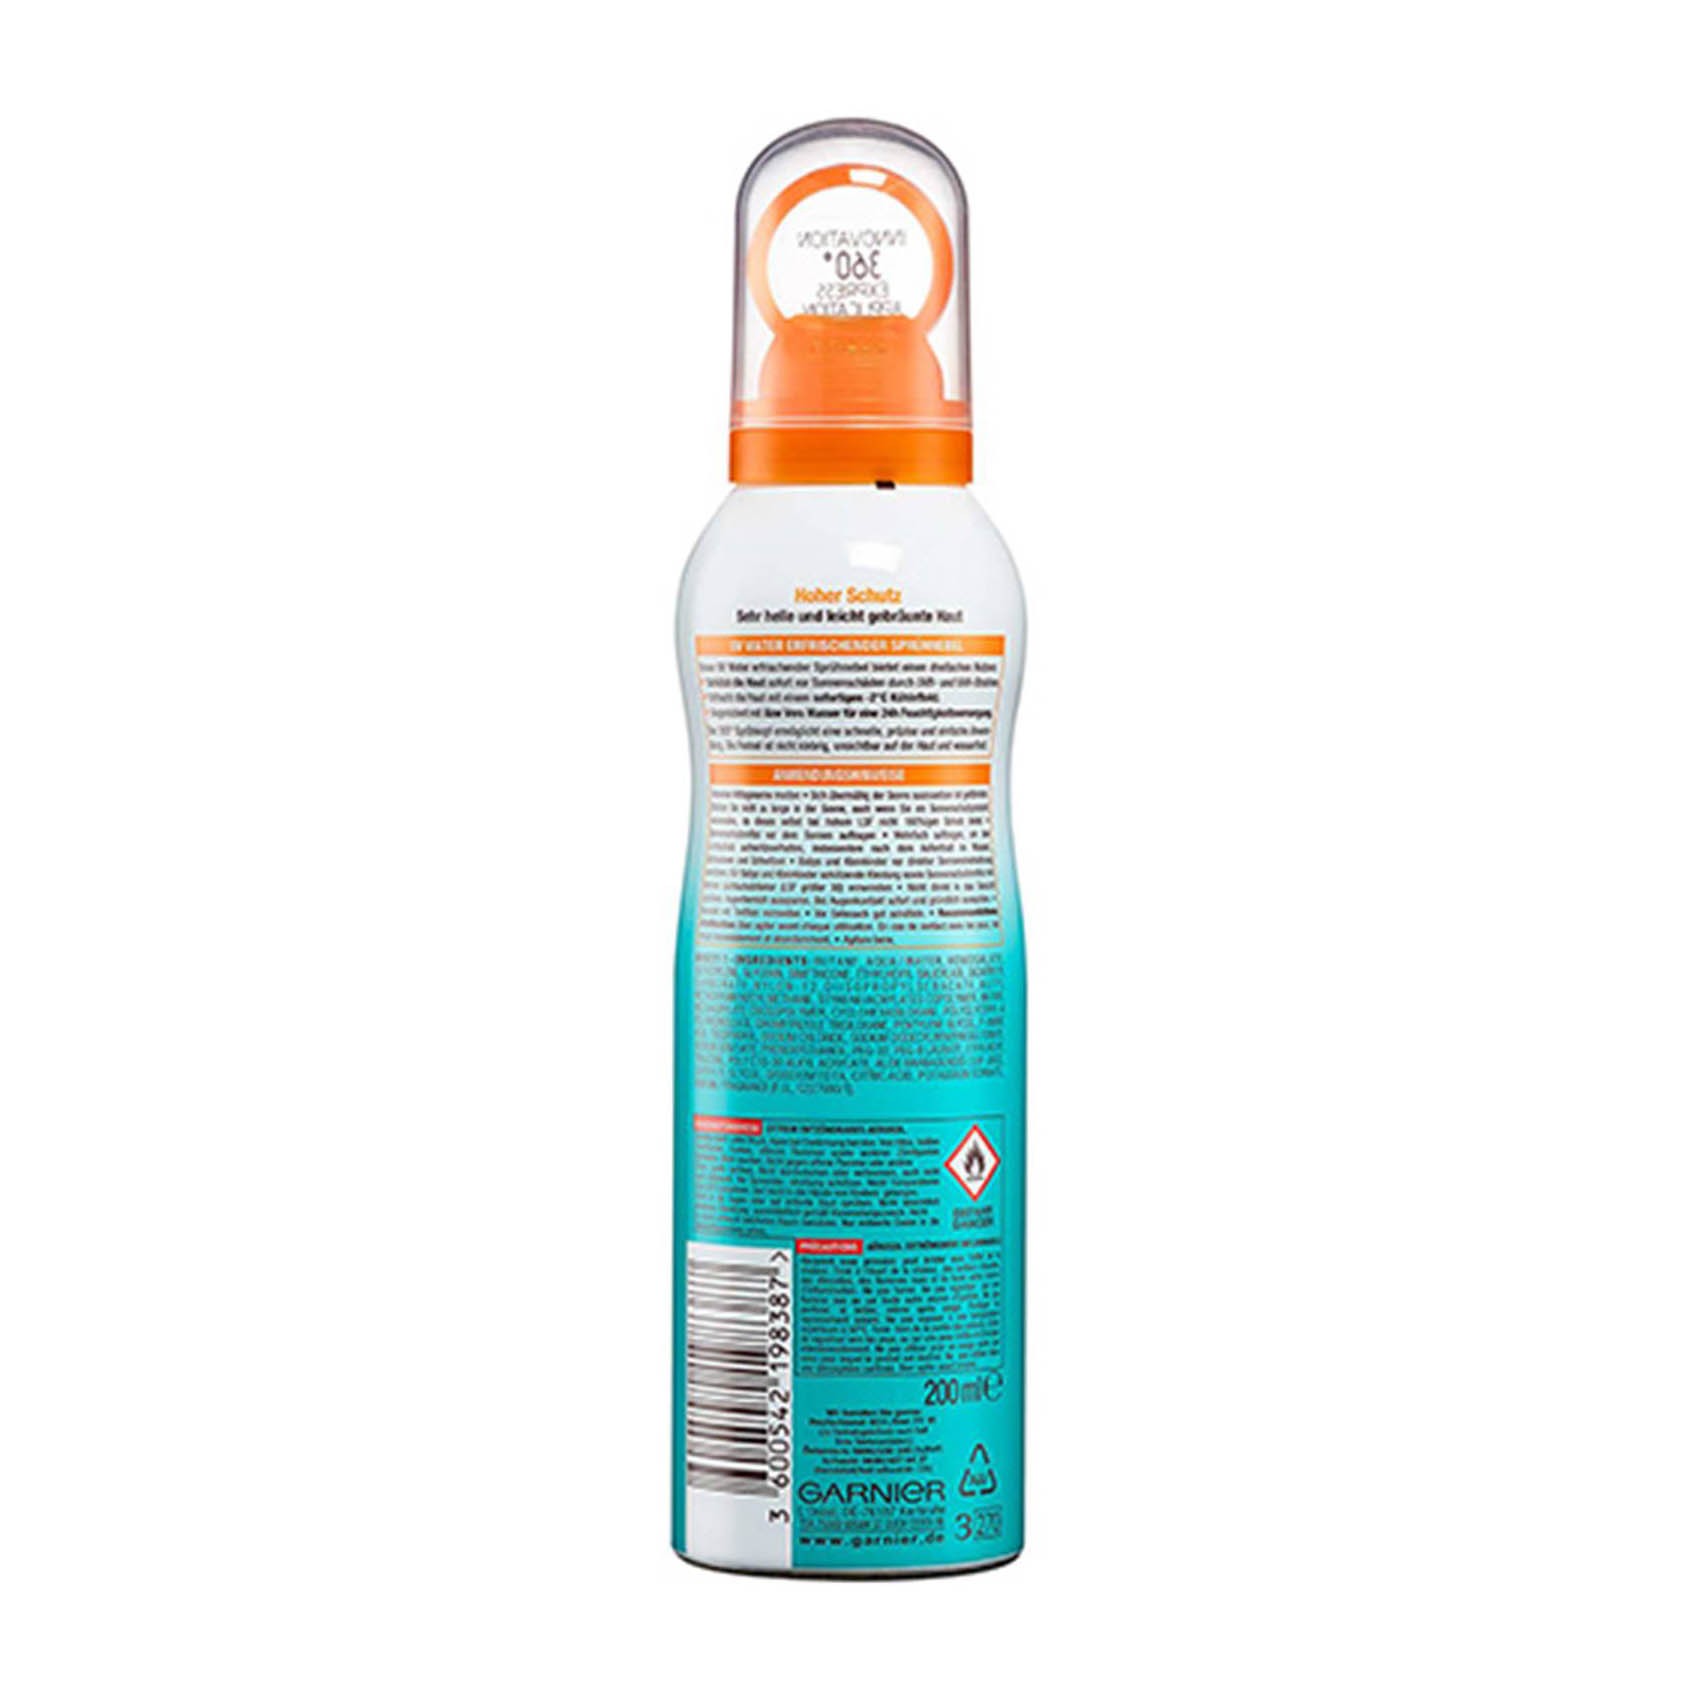 Refreshing Sun Protection Mist - Ambre Solaire UV Water 30